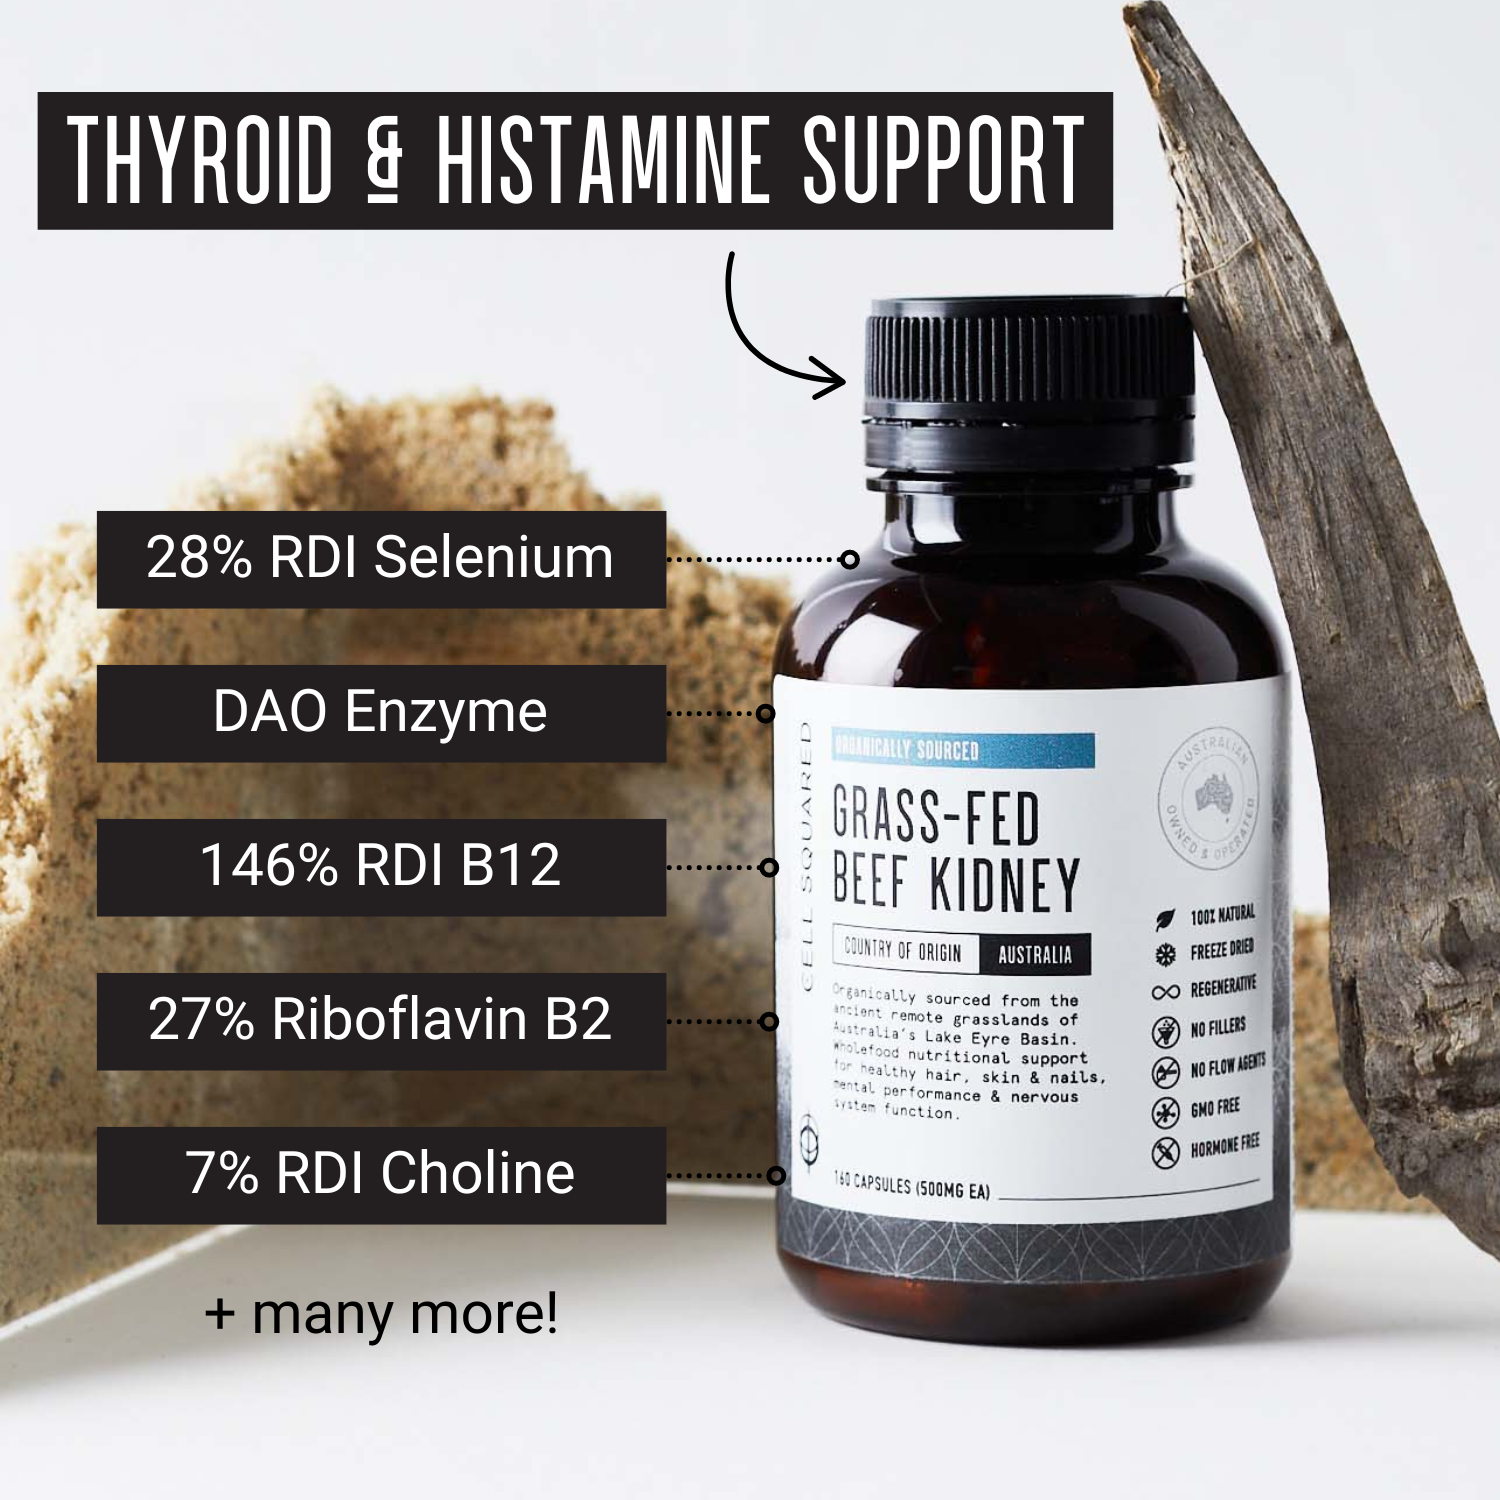 Kidney capsules for thyroid and histamine support